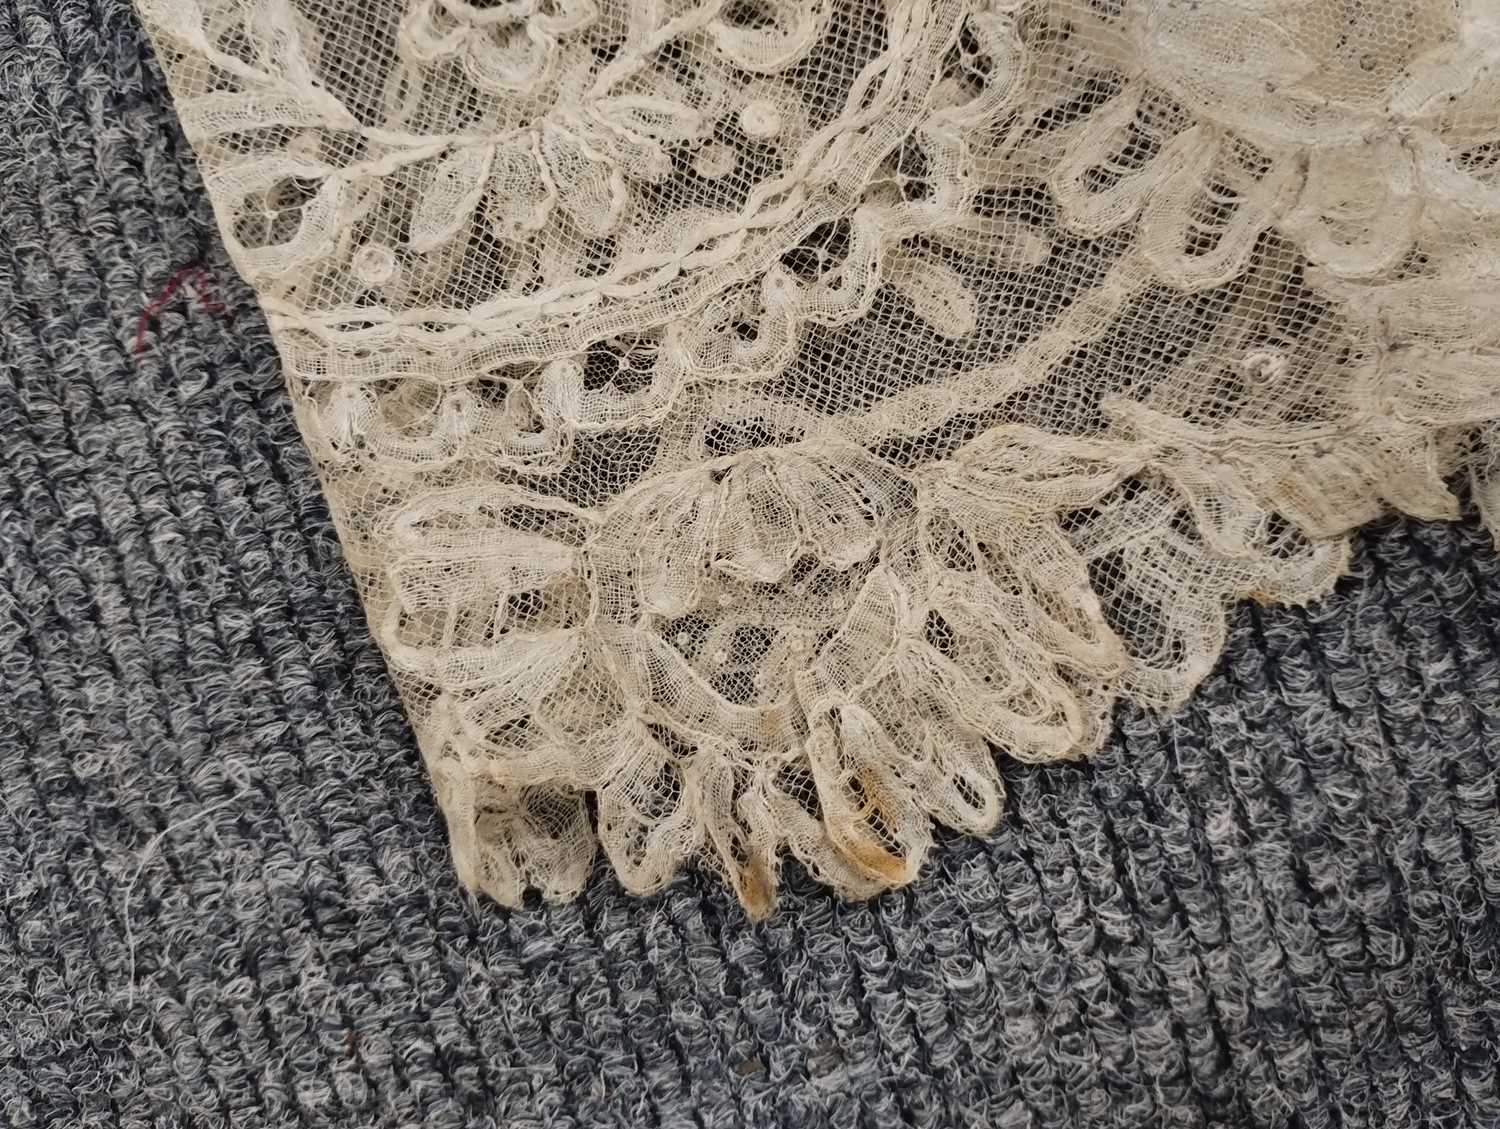 Early 20th Century Lace comprising a flounce with appliquéd flower heads and motifs within a - Image 5 of 32